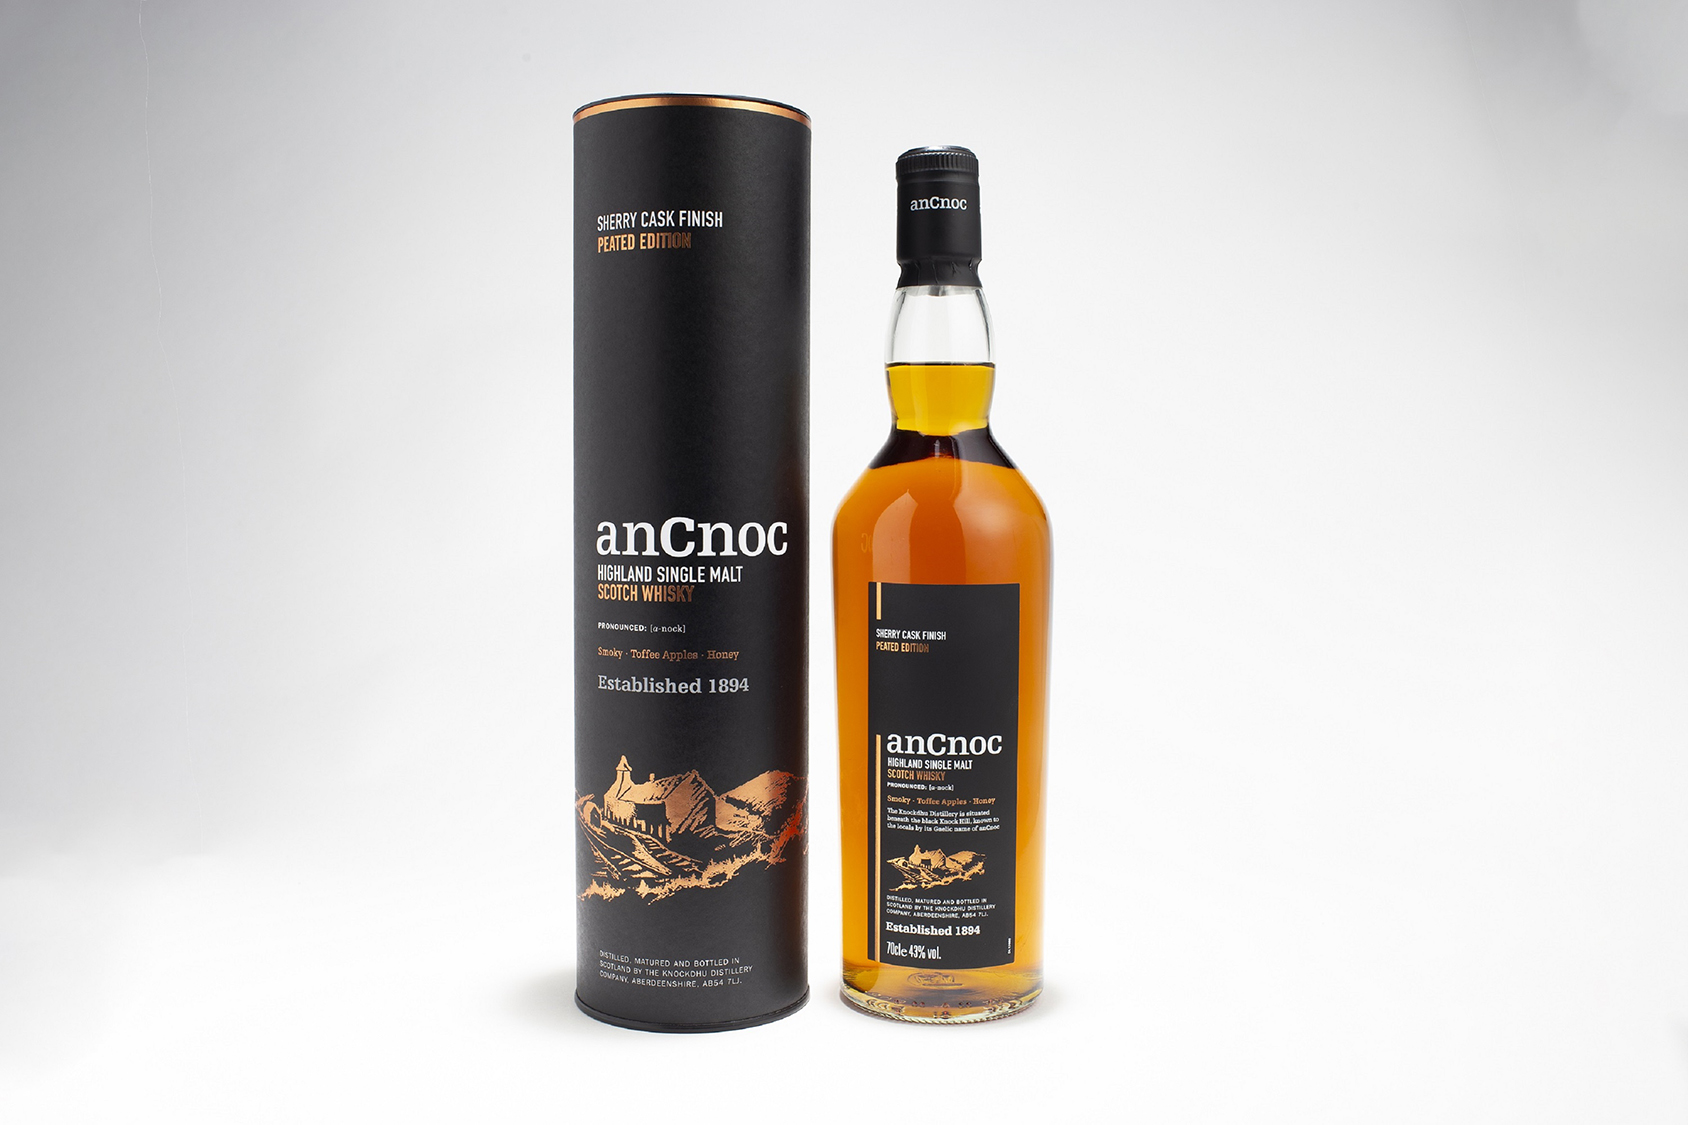 anCnoc Sherry Cask Finish, Peated Edition